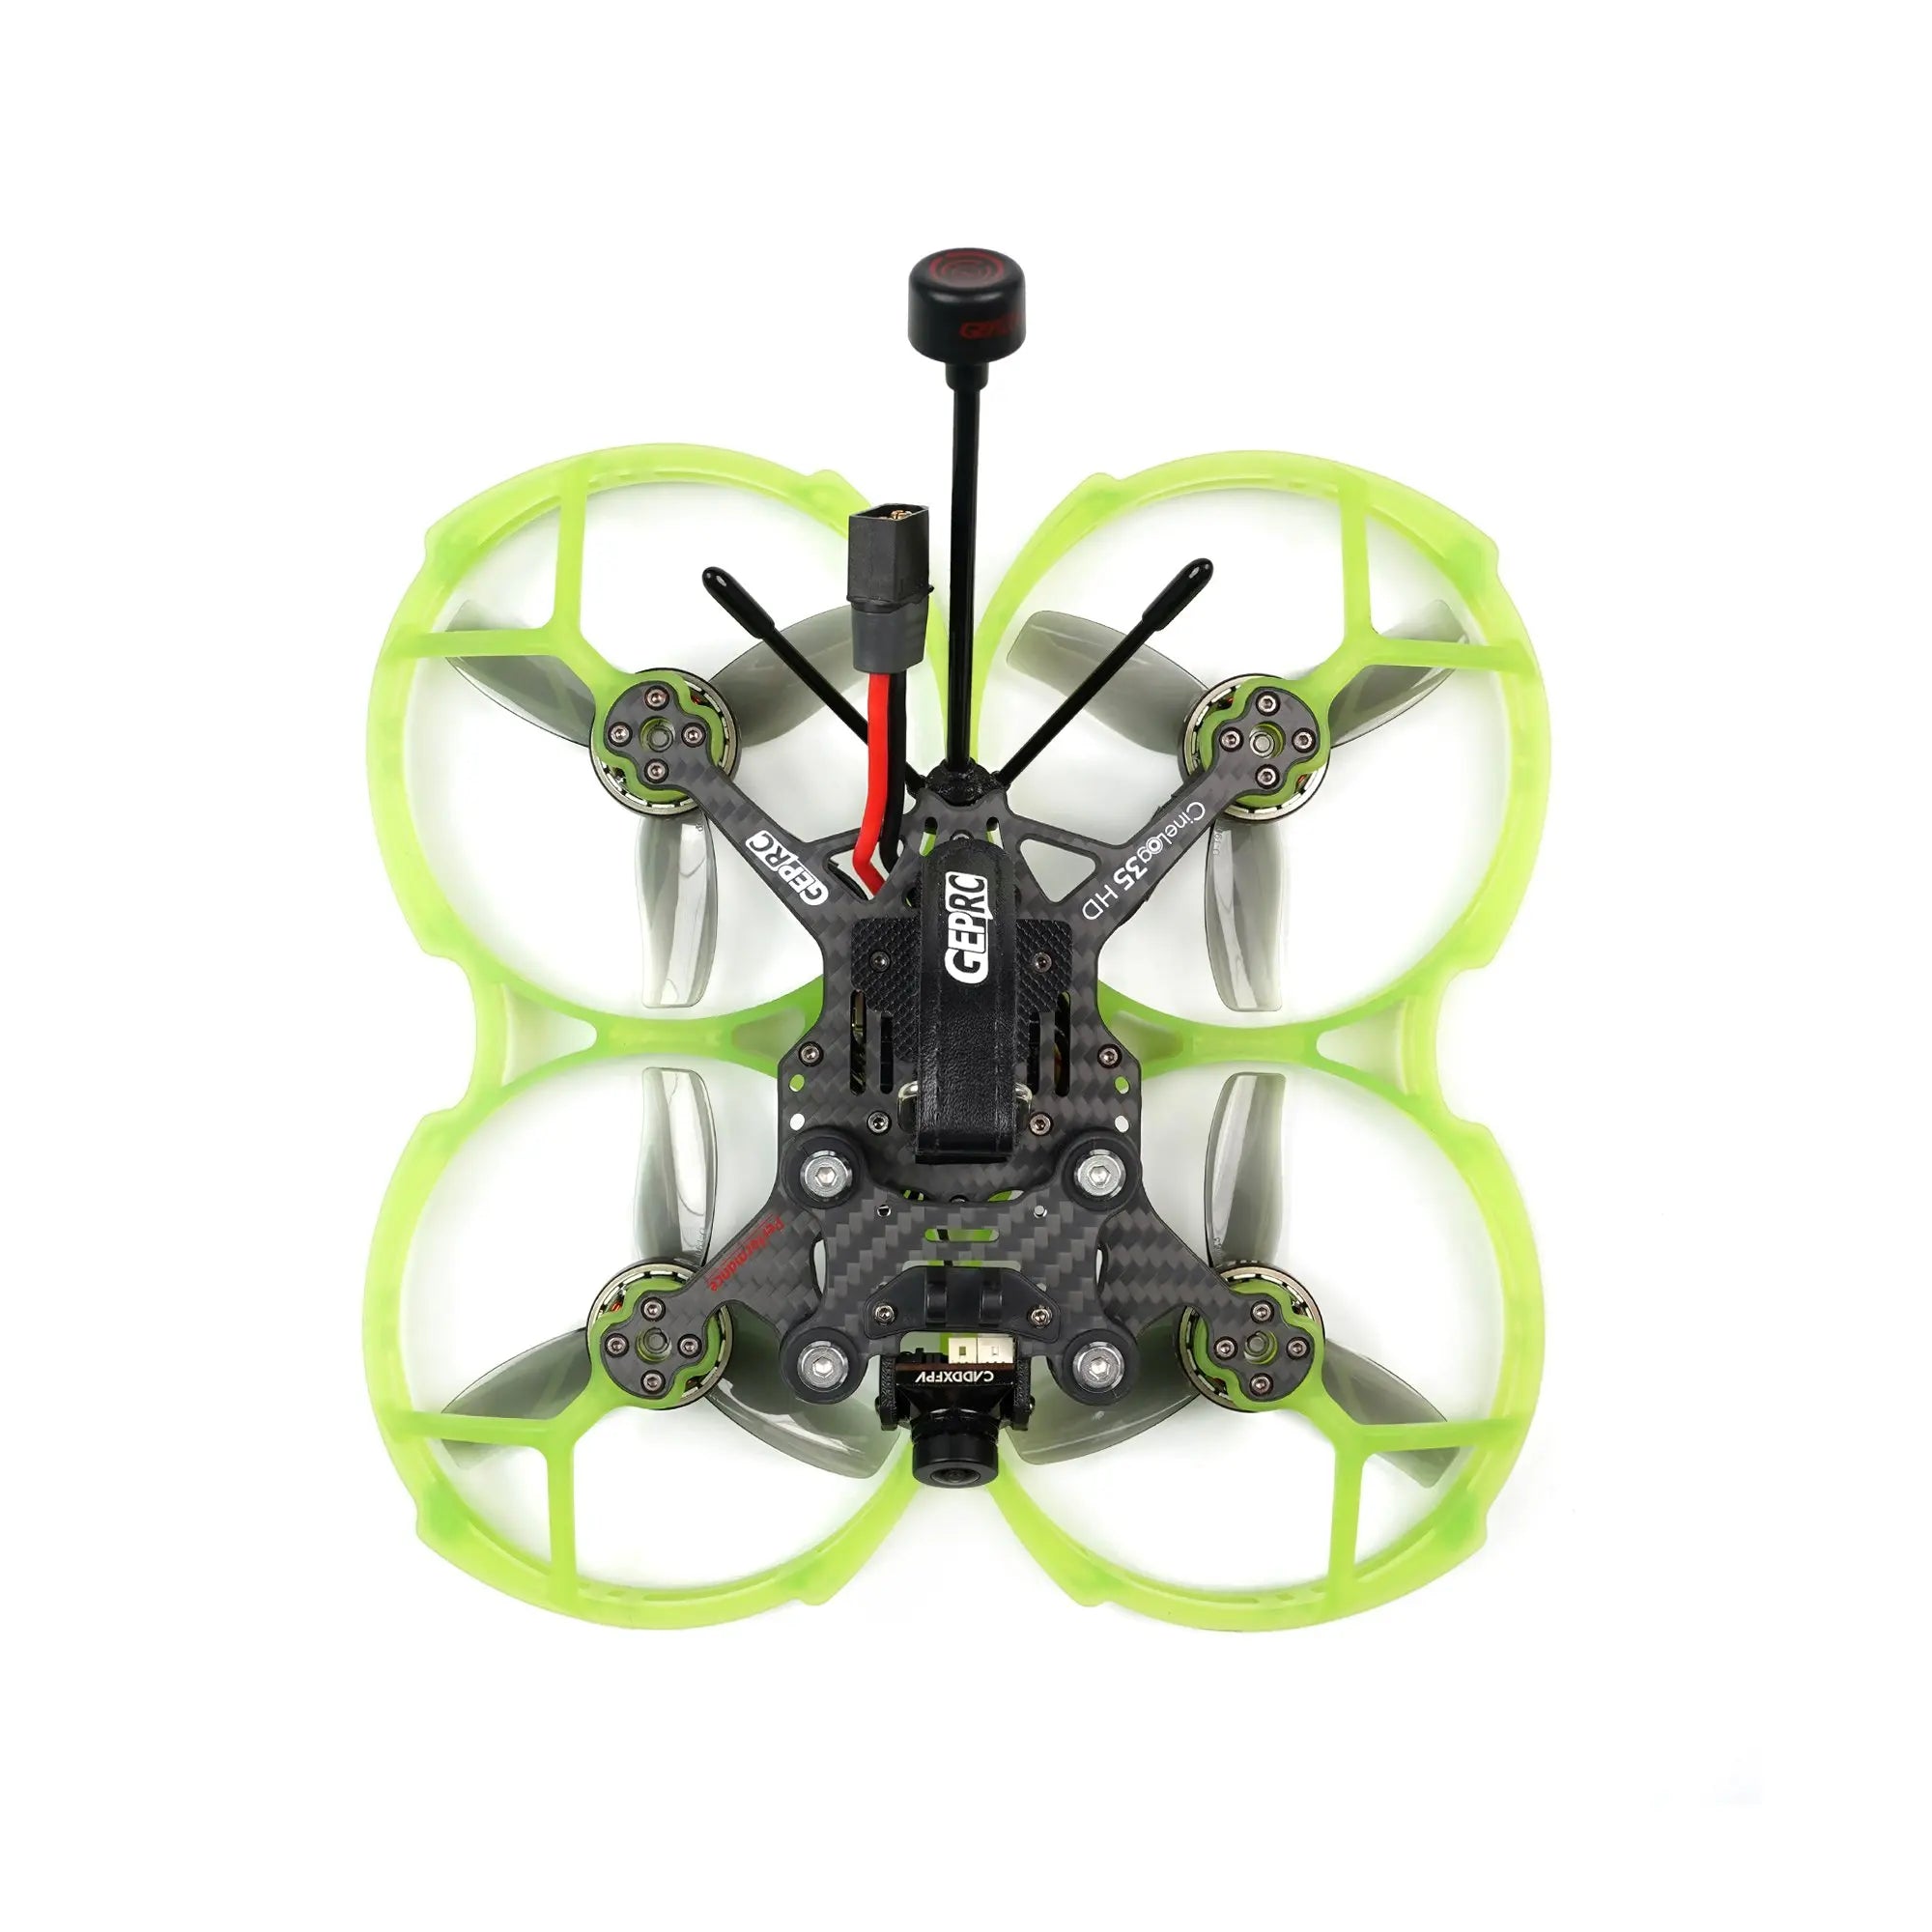 GEPRC CineLog35 Cinewhoop FPV Drone, the CineLog35 is designed with lighter weight and longer endurance . the concept of the Performance